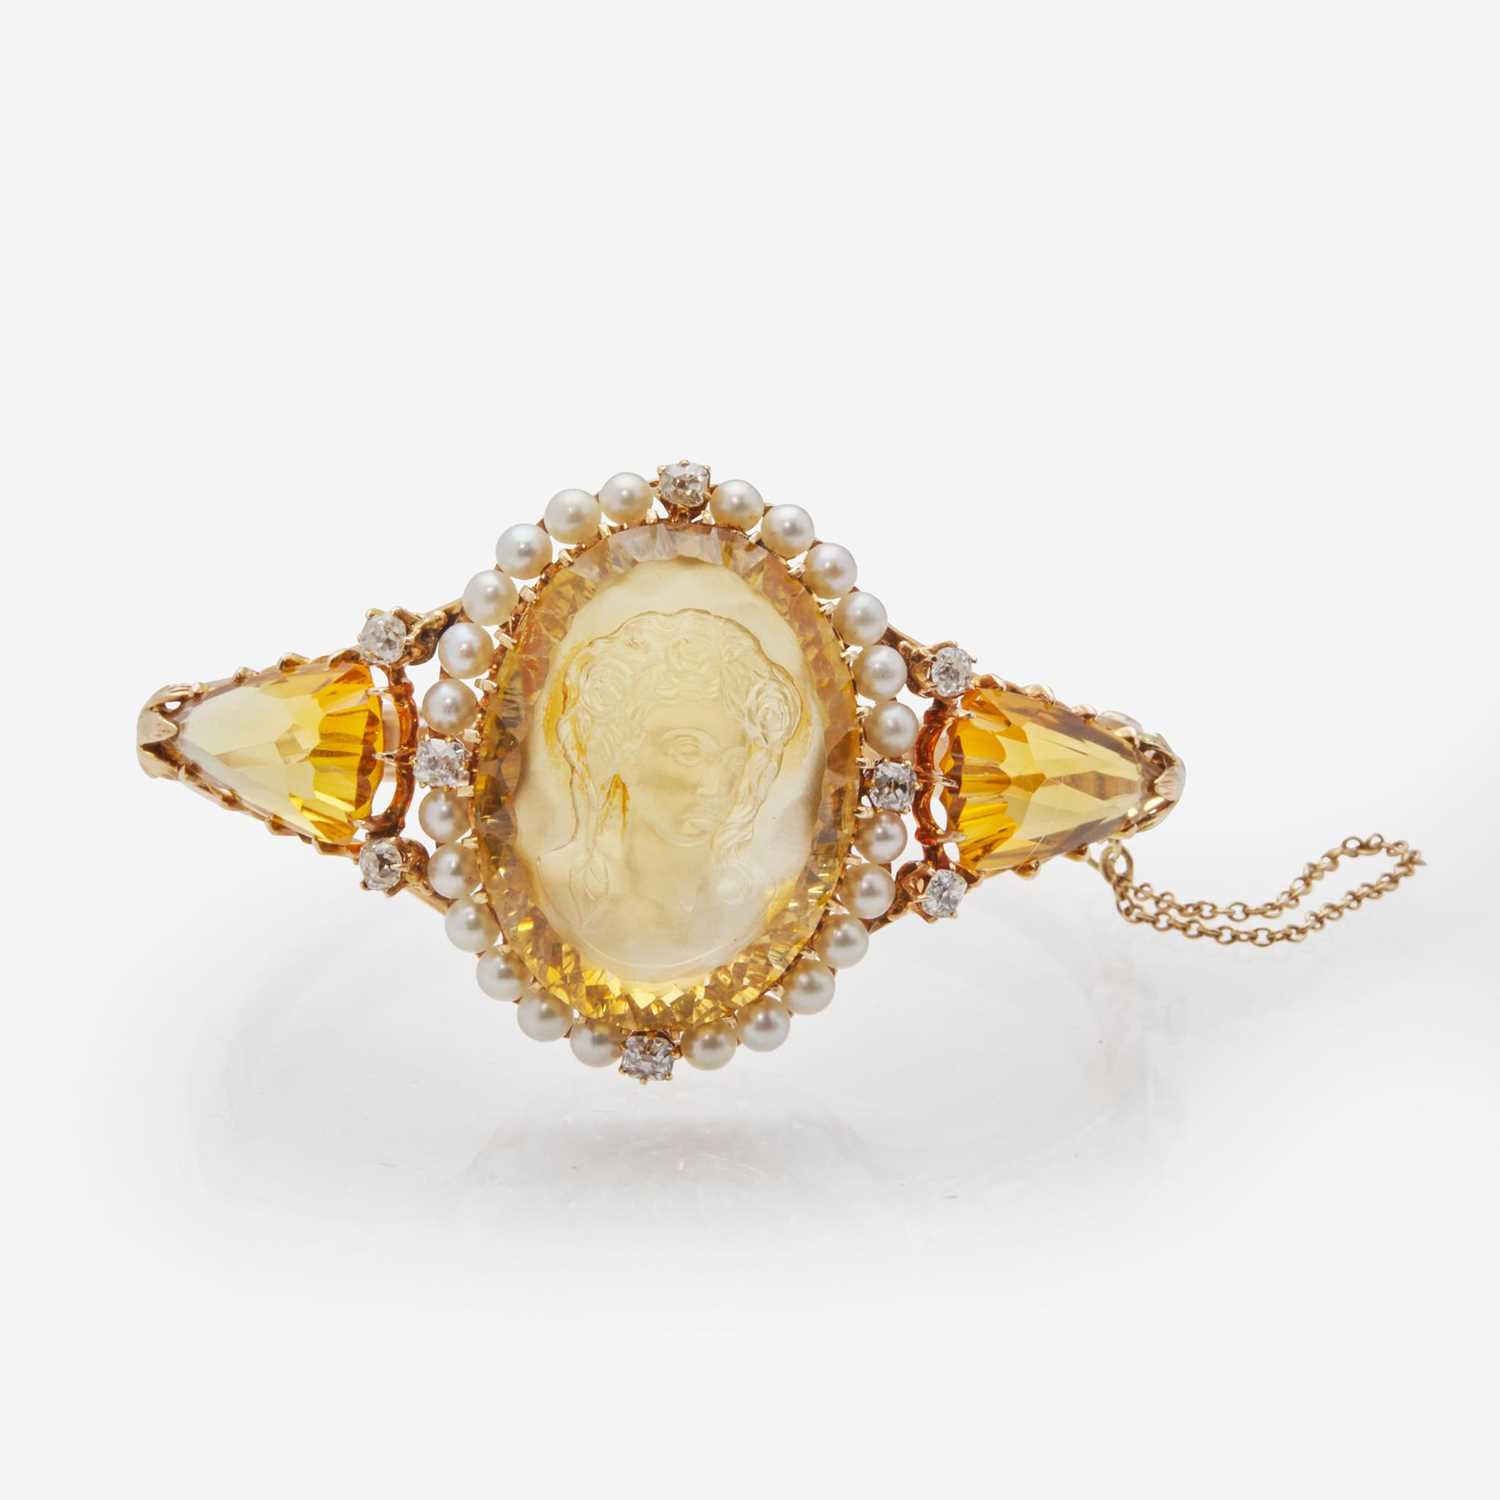 Lot 87 - A Yellow Gold, Citrine, Diamond, and Seed Pearl Bracelet